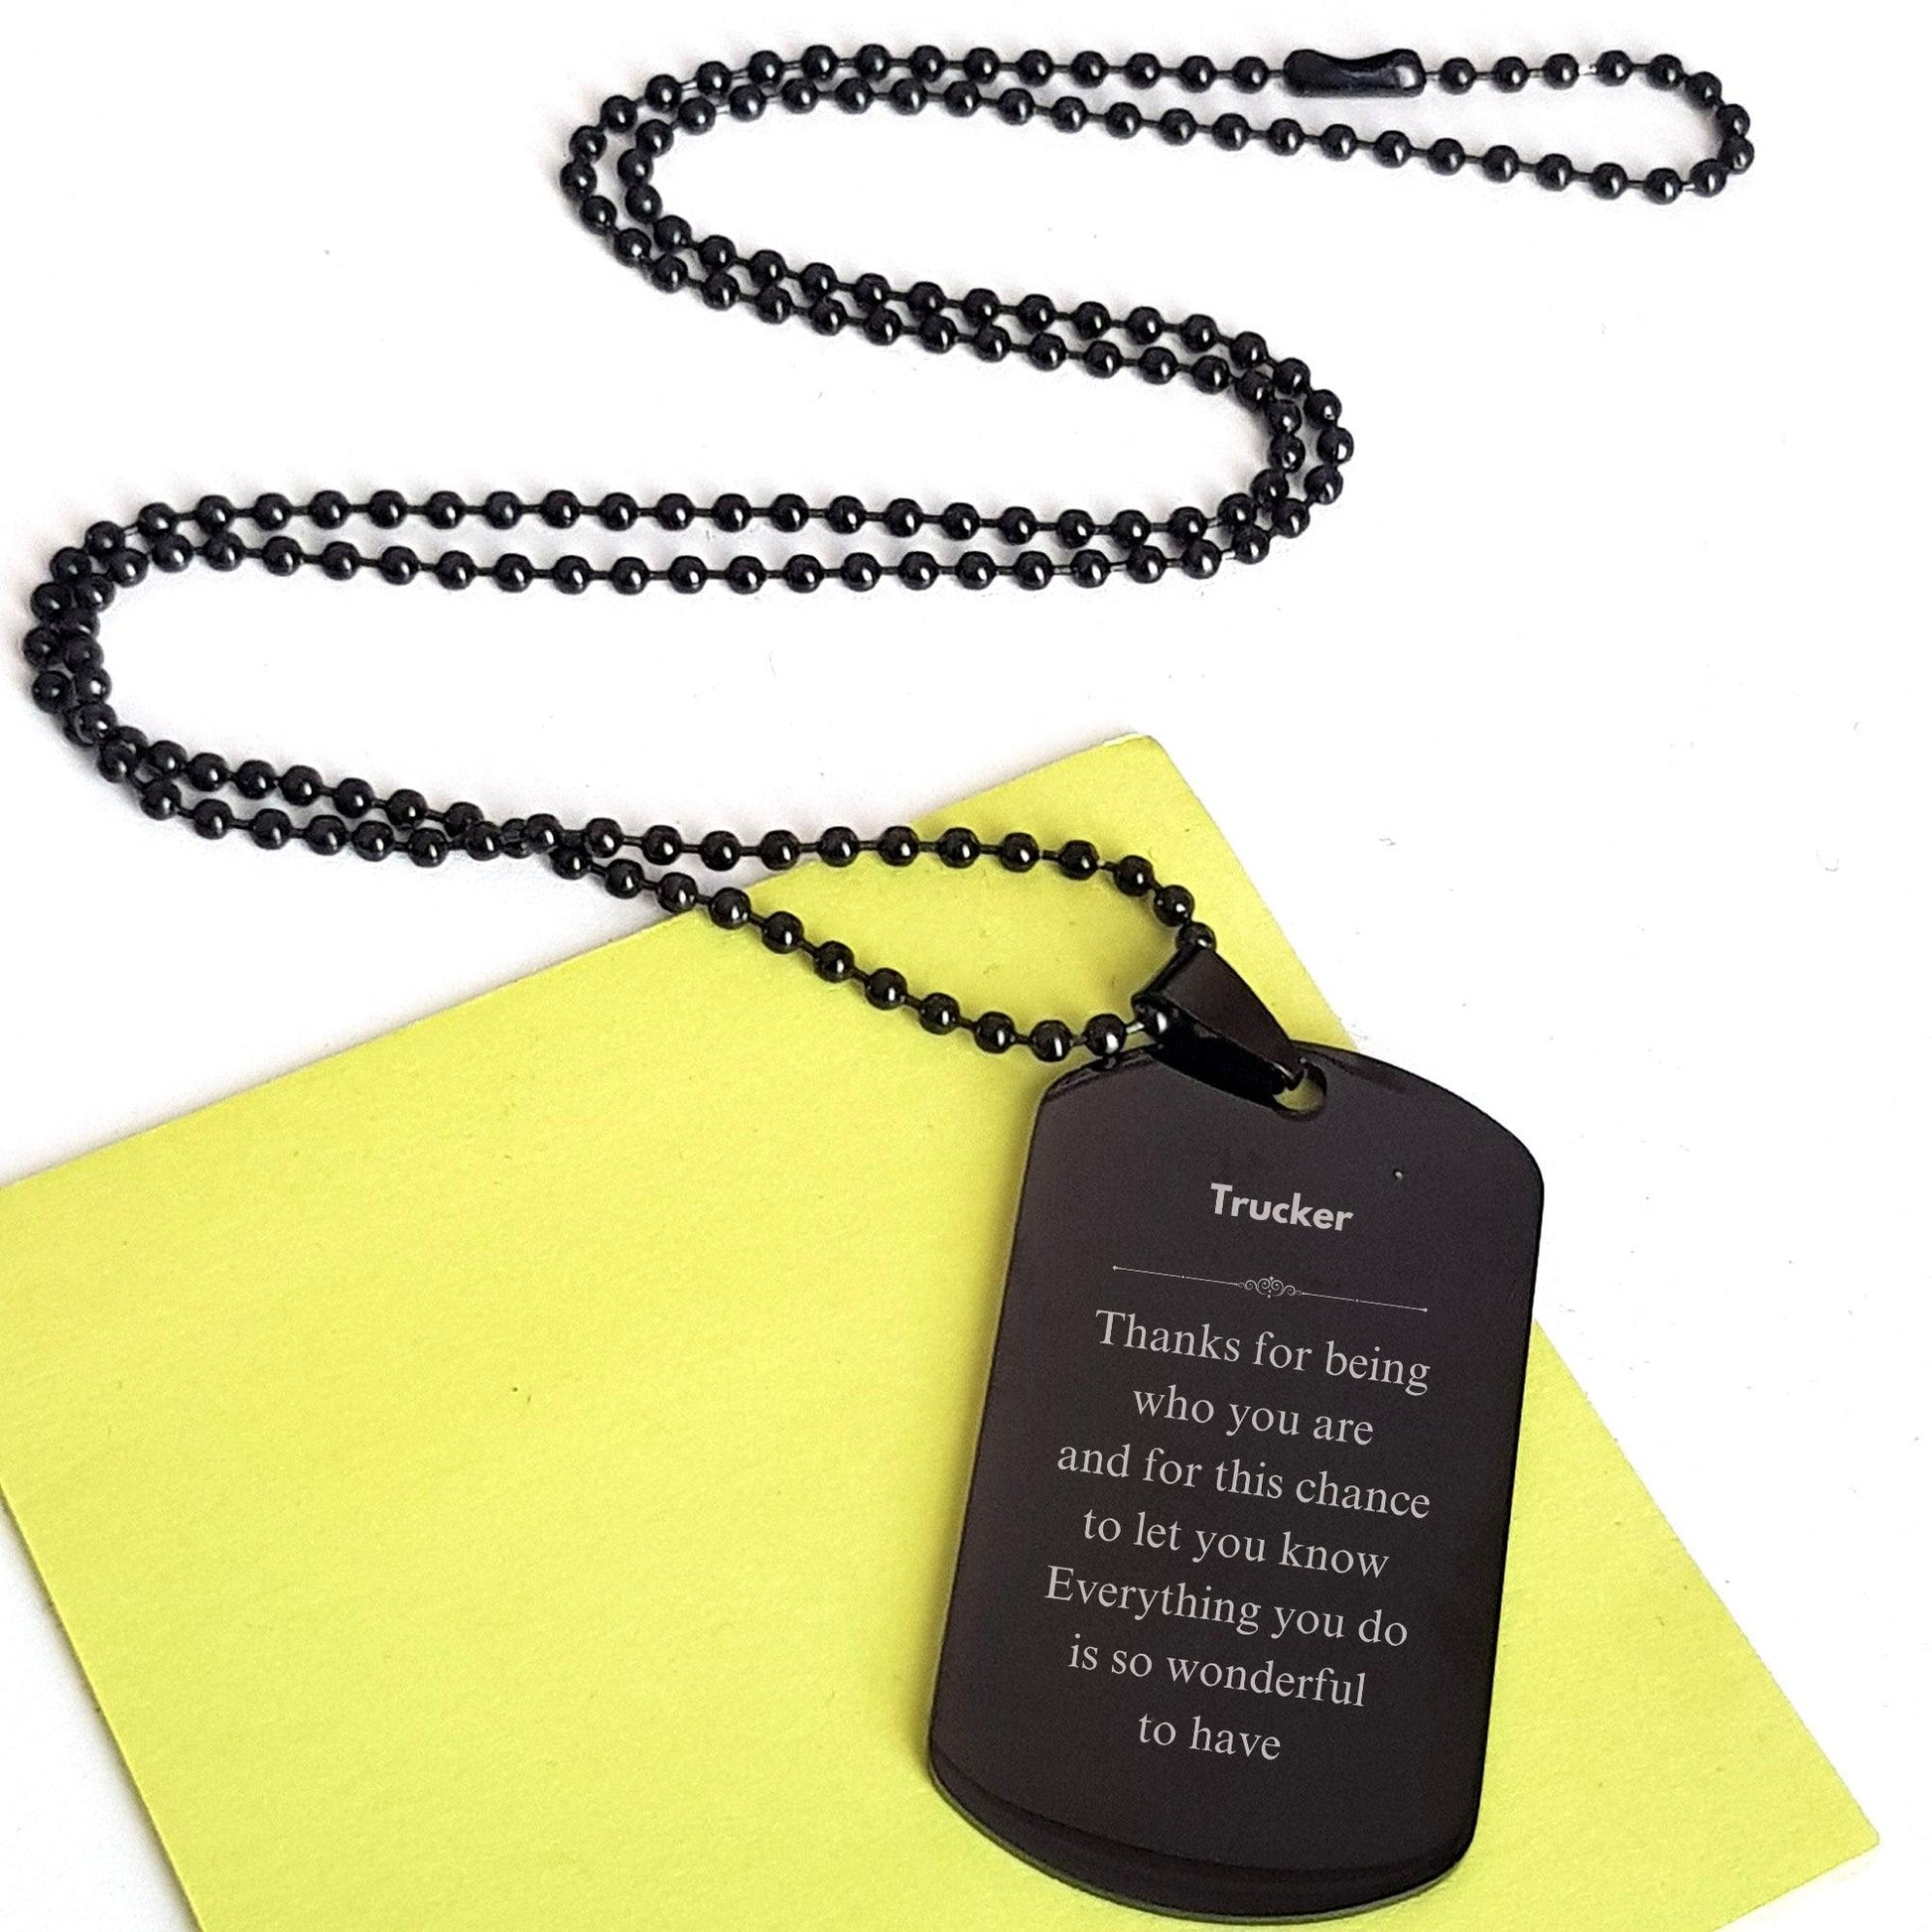 To My Brother In Law Gifts, Inspirational Brother In Law Black Dog Tag, Sentimental Birthday Christmas Unique Gifts For Brother In Law Behind you, all your memories, before you, all your dreams, around you, all who love you, within you, all you need - Mallard Moon Gift Shop